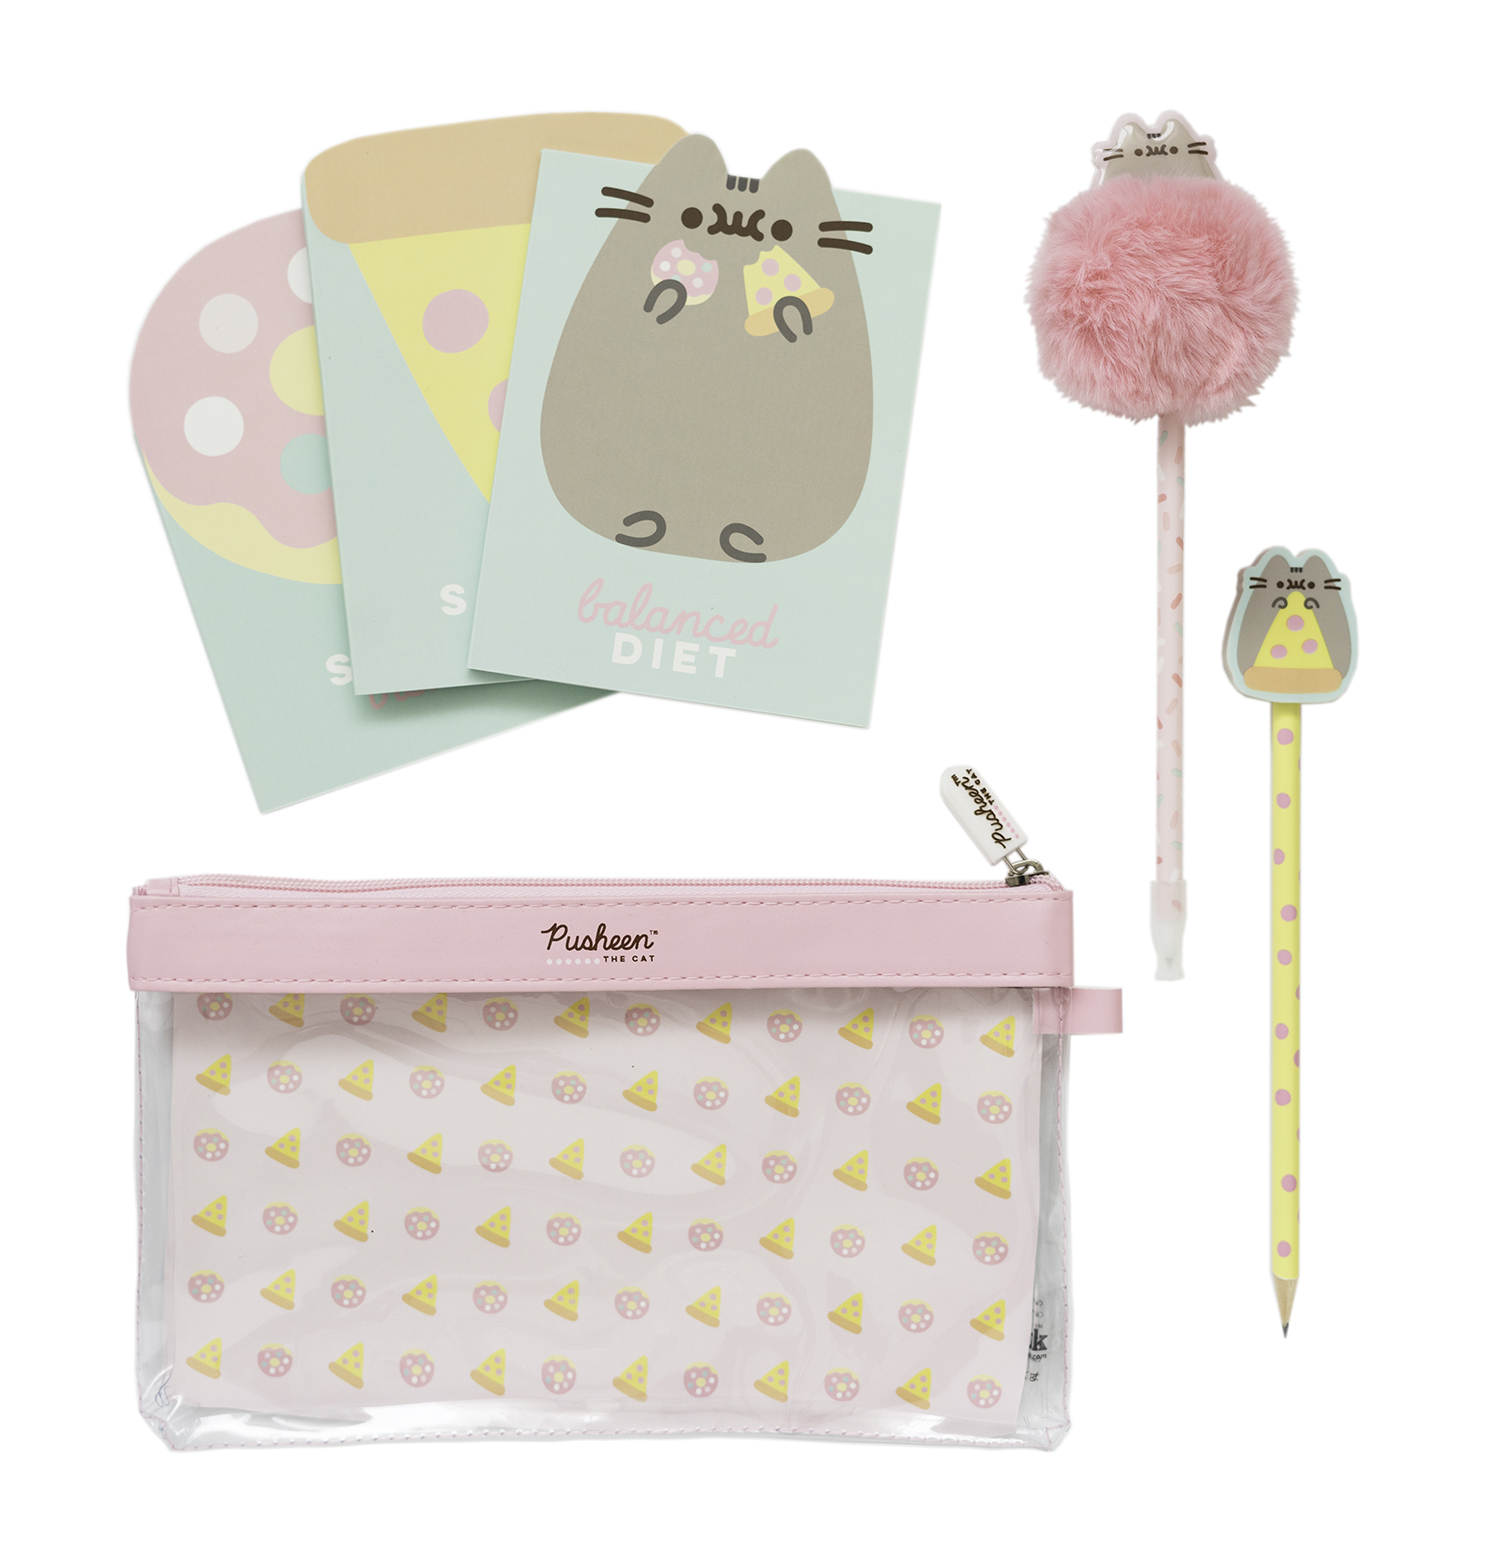 Official Pusheen Pencil Case Stationery Set, Writting Set with Pen